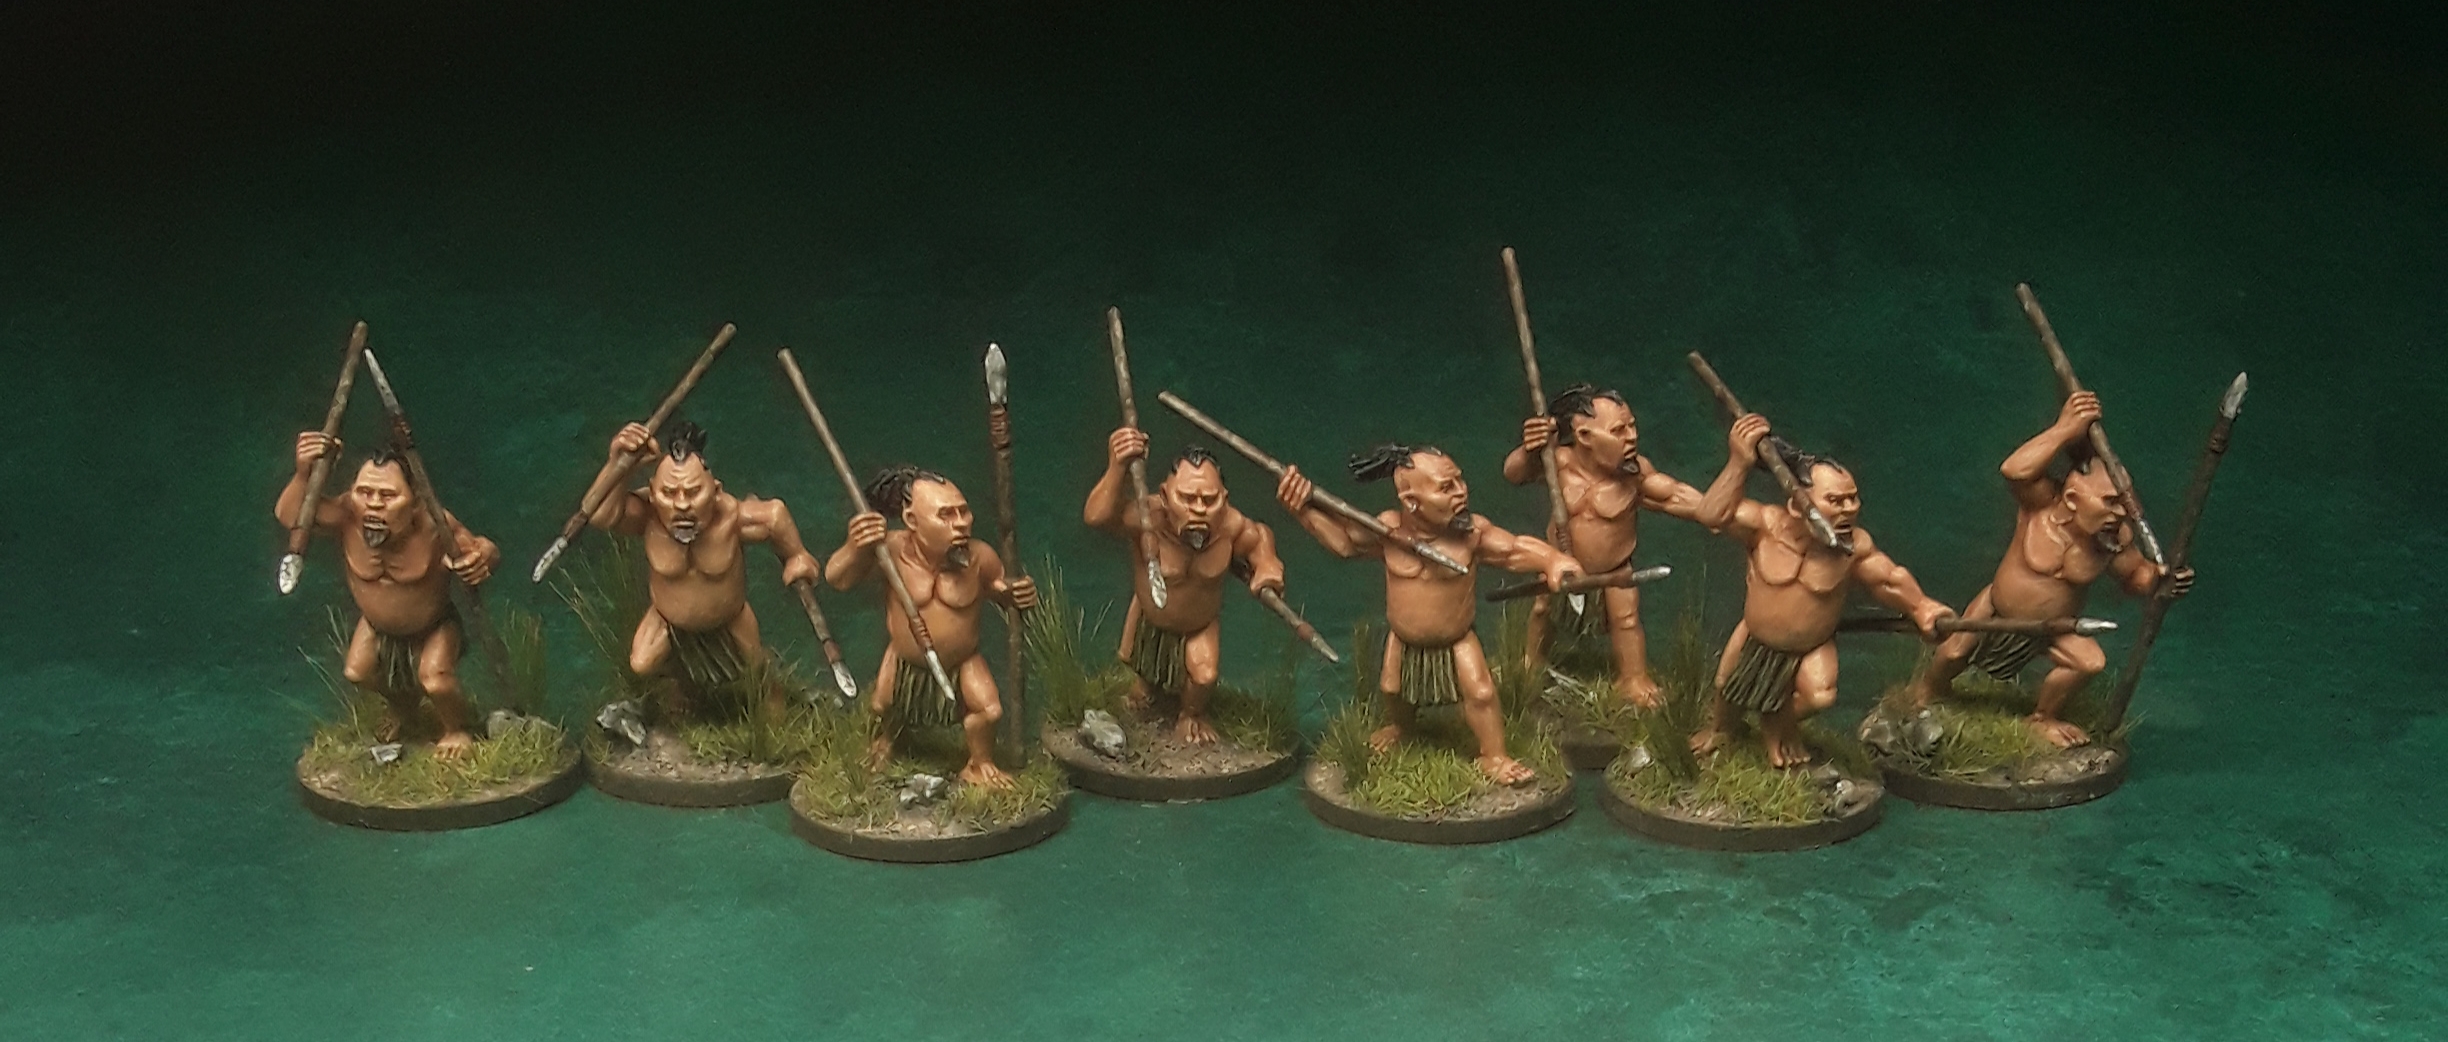 Woses With Spears - Ragnarok Miniatures